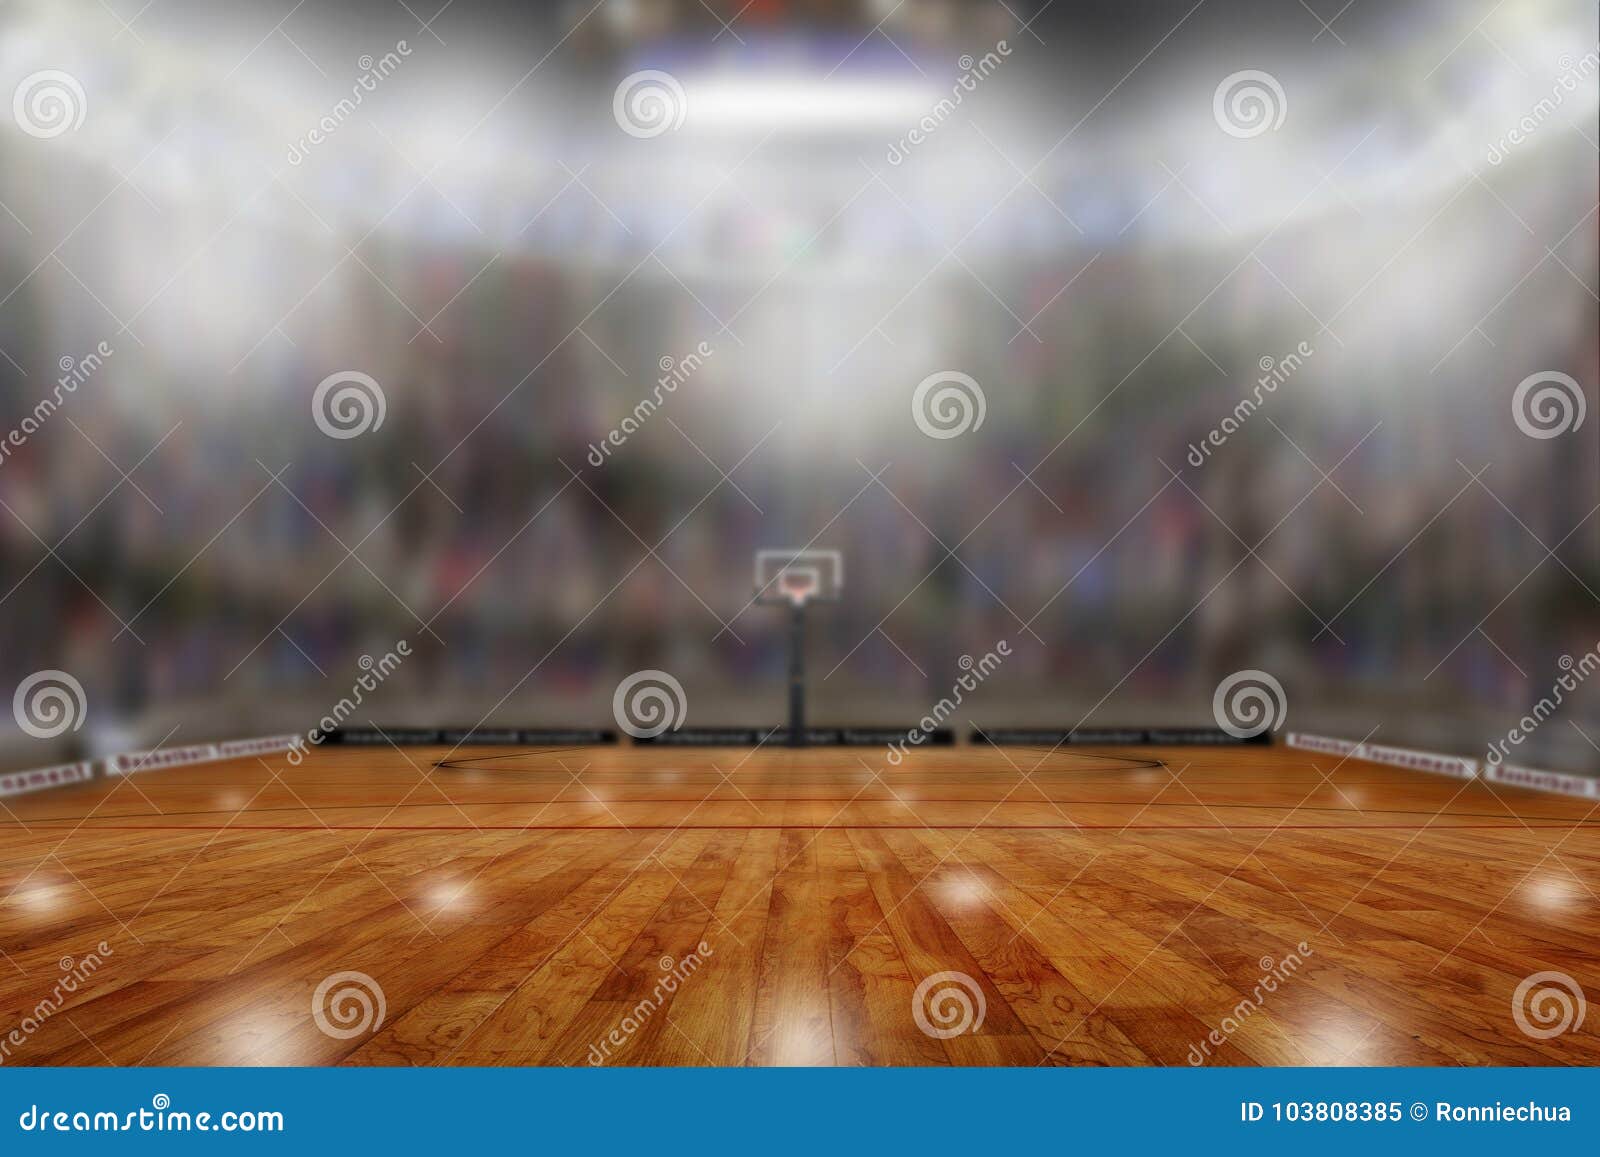 basketball arena with copy space